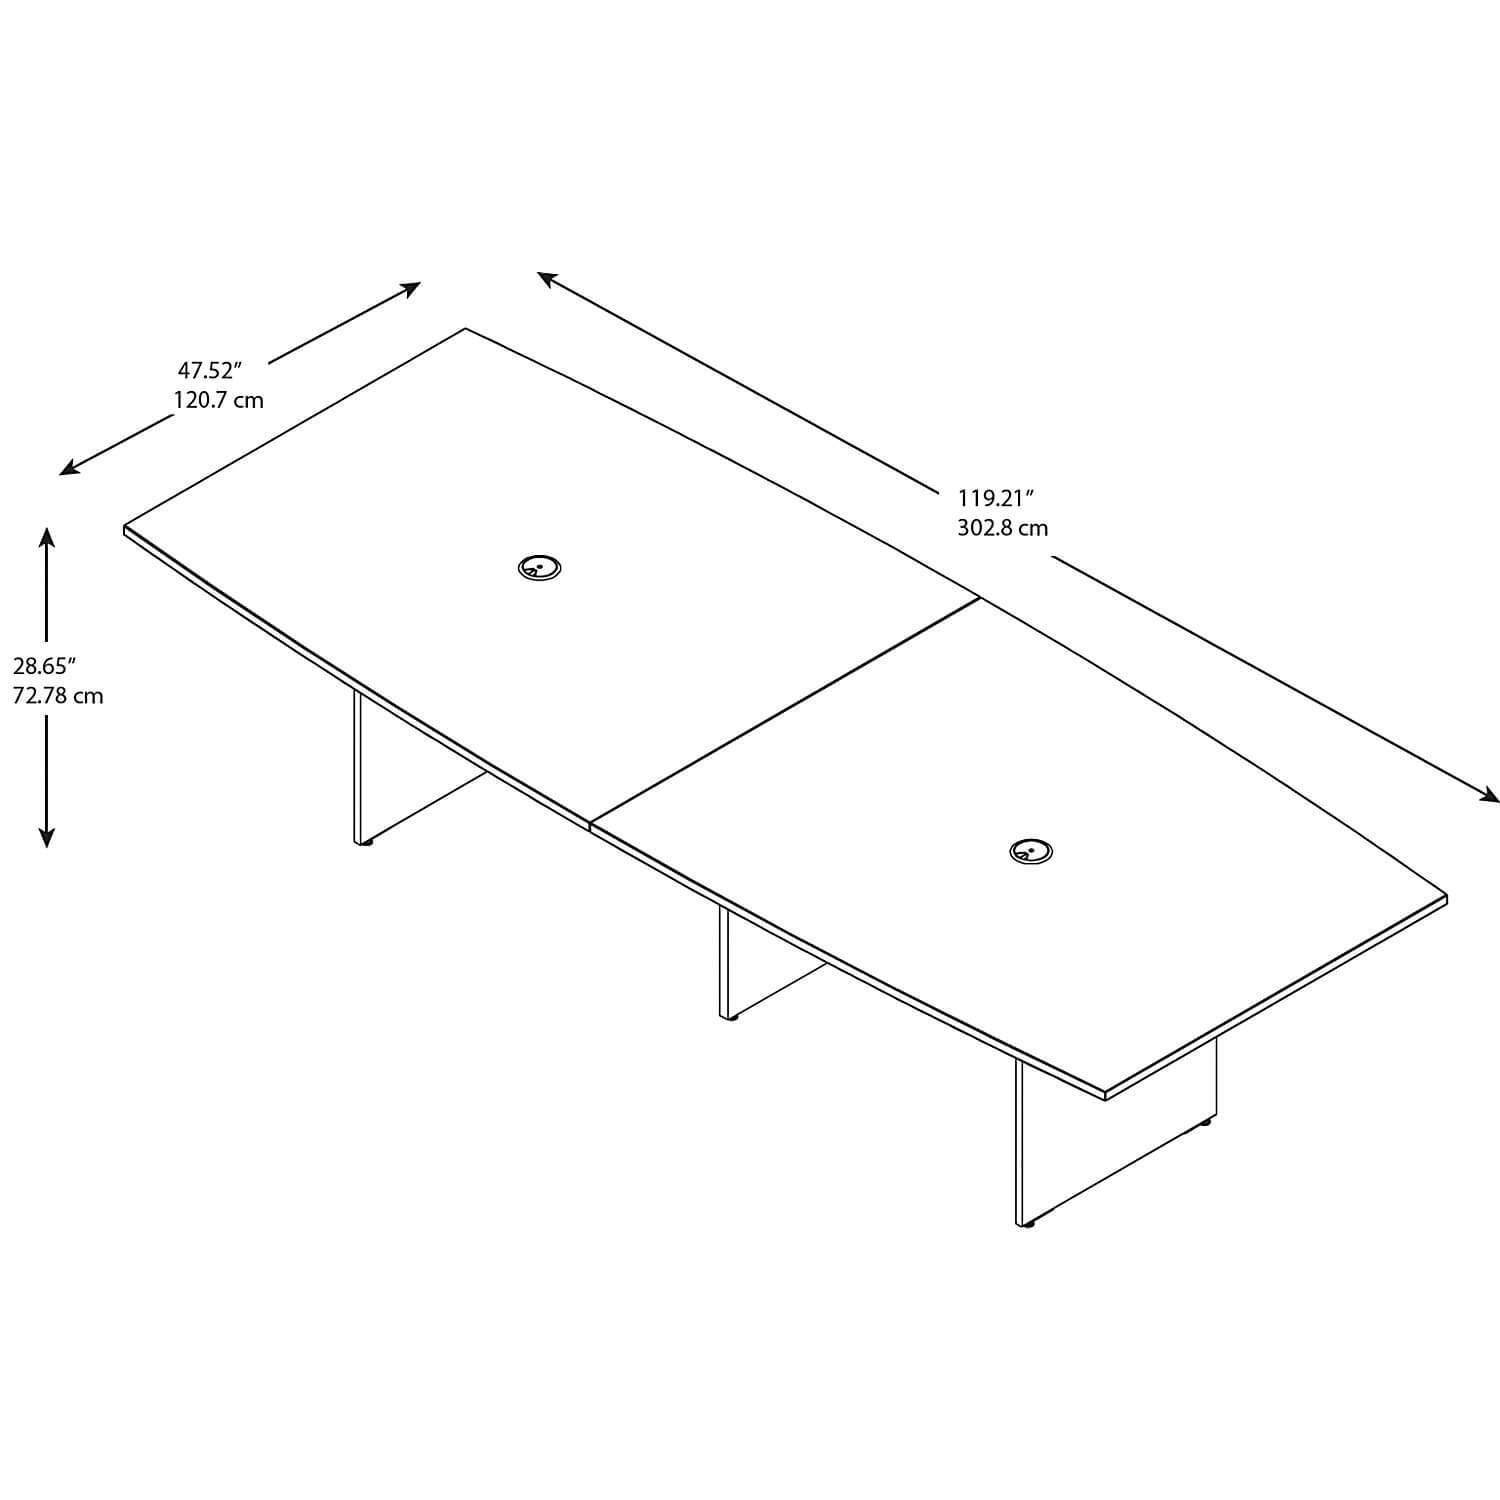 Conference tables dimensions 1 2 3 4 5